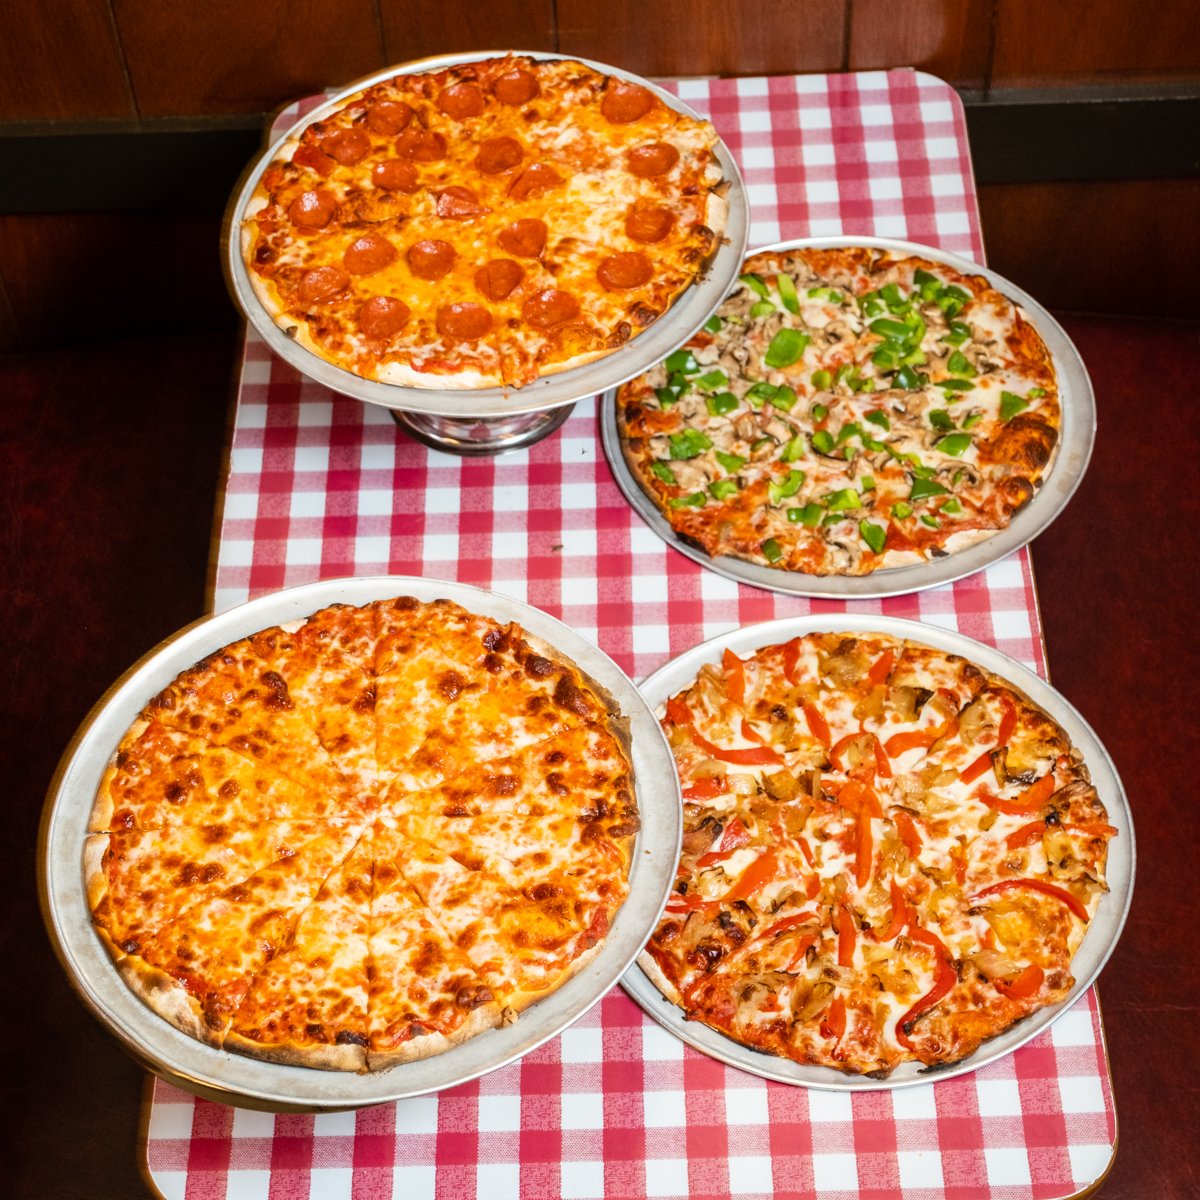 You worked so hard on that Thanksgiving meal that you deserve a break! Come treat yourself to a pizza at our place this weekend.  #WhatHorse?  #KinchleysTavern #CheckeredTabletops #KinchleysPizza #ThinCrustPizza   #Kinchleys #Pizza #KinchleysNJ #FamilyFriendly #LocalFavorite